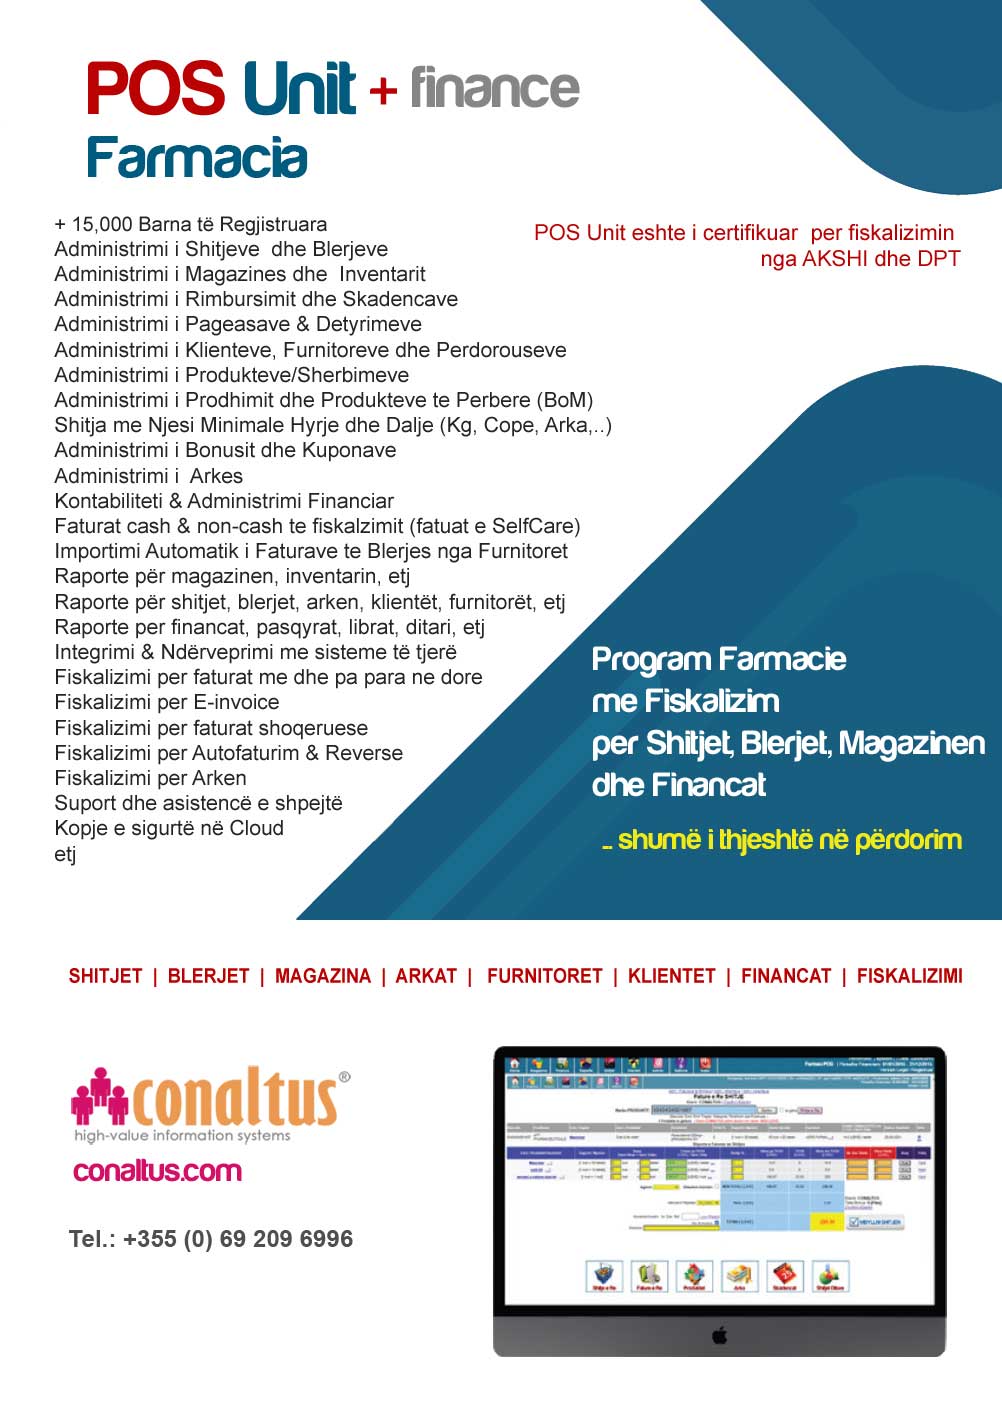 CONALUTS - Digital Transformation, IT & Software